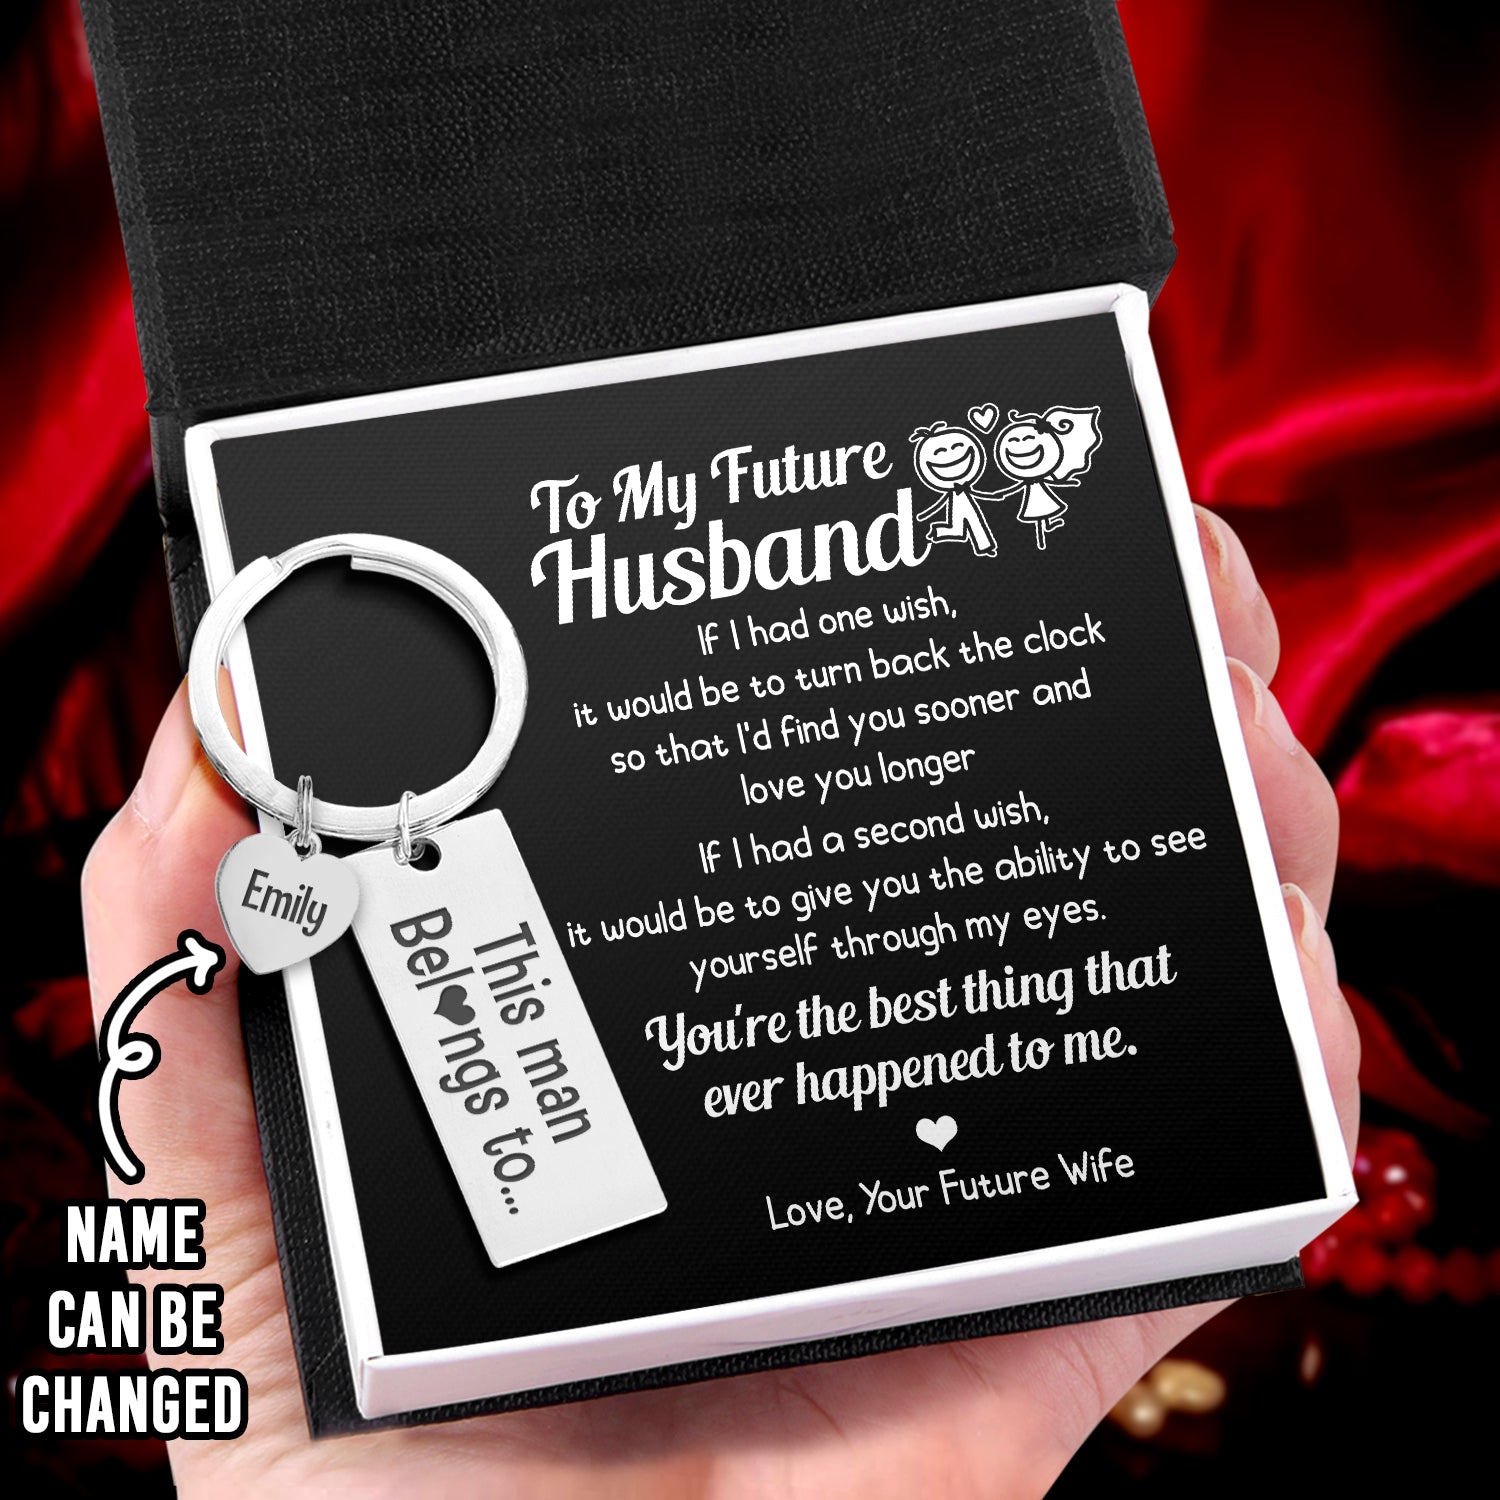 Personalized Engraved Keychain - Family - To My Future Husband - You're The Best Thing That Ever Happened To Me - Ukgkc24003